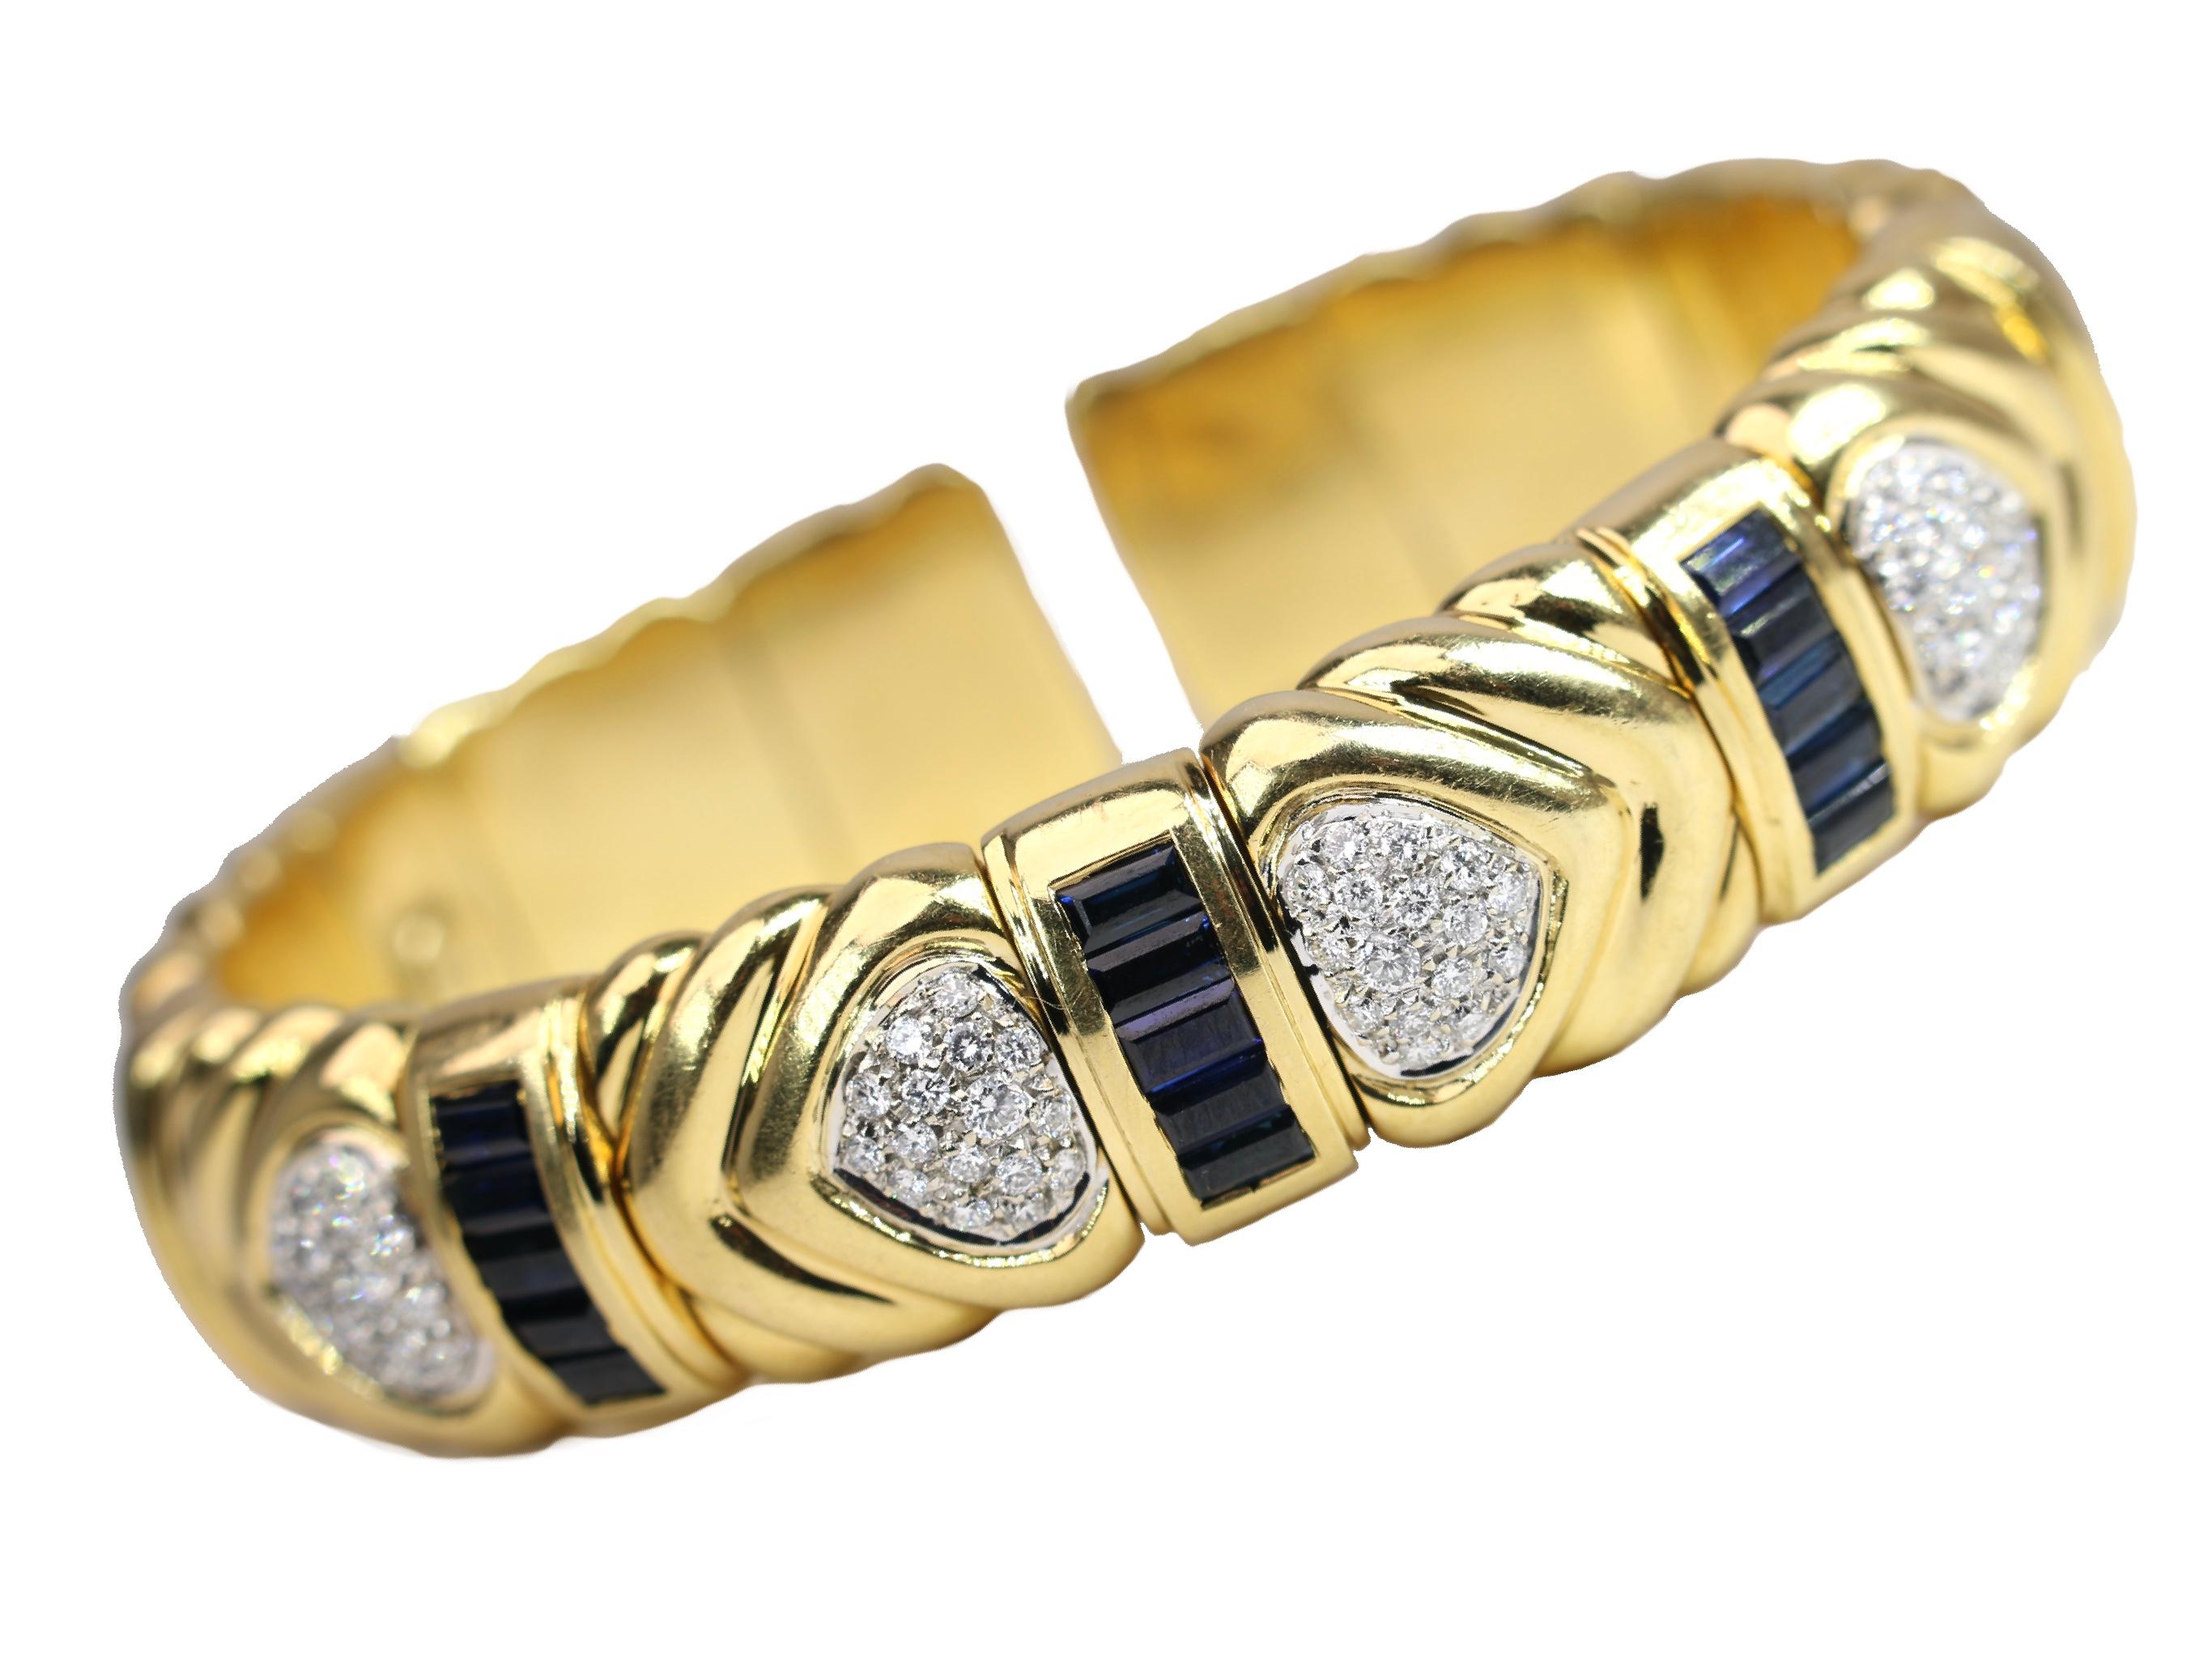 Wempe 18K cuff with sapphires and diamonds.  Expandable cuff.  Diameter is 6 inches. 
69.9 Grams
.5